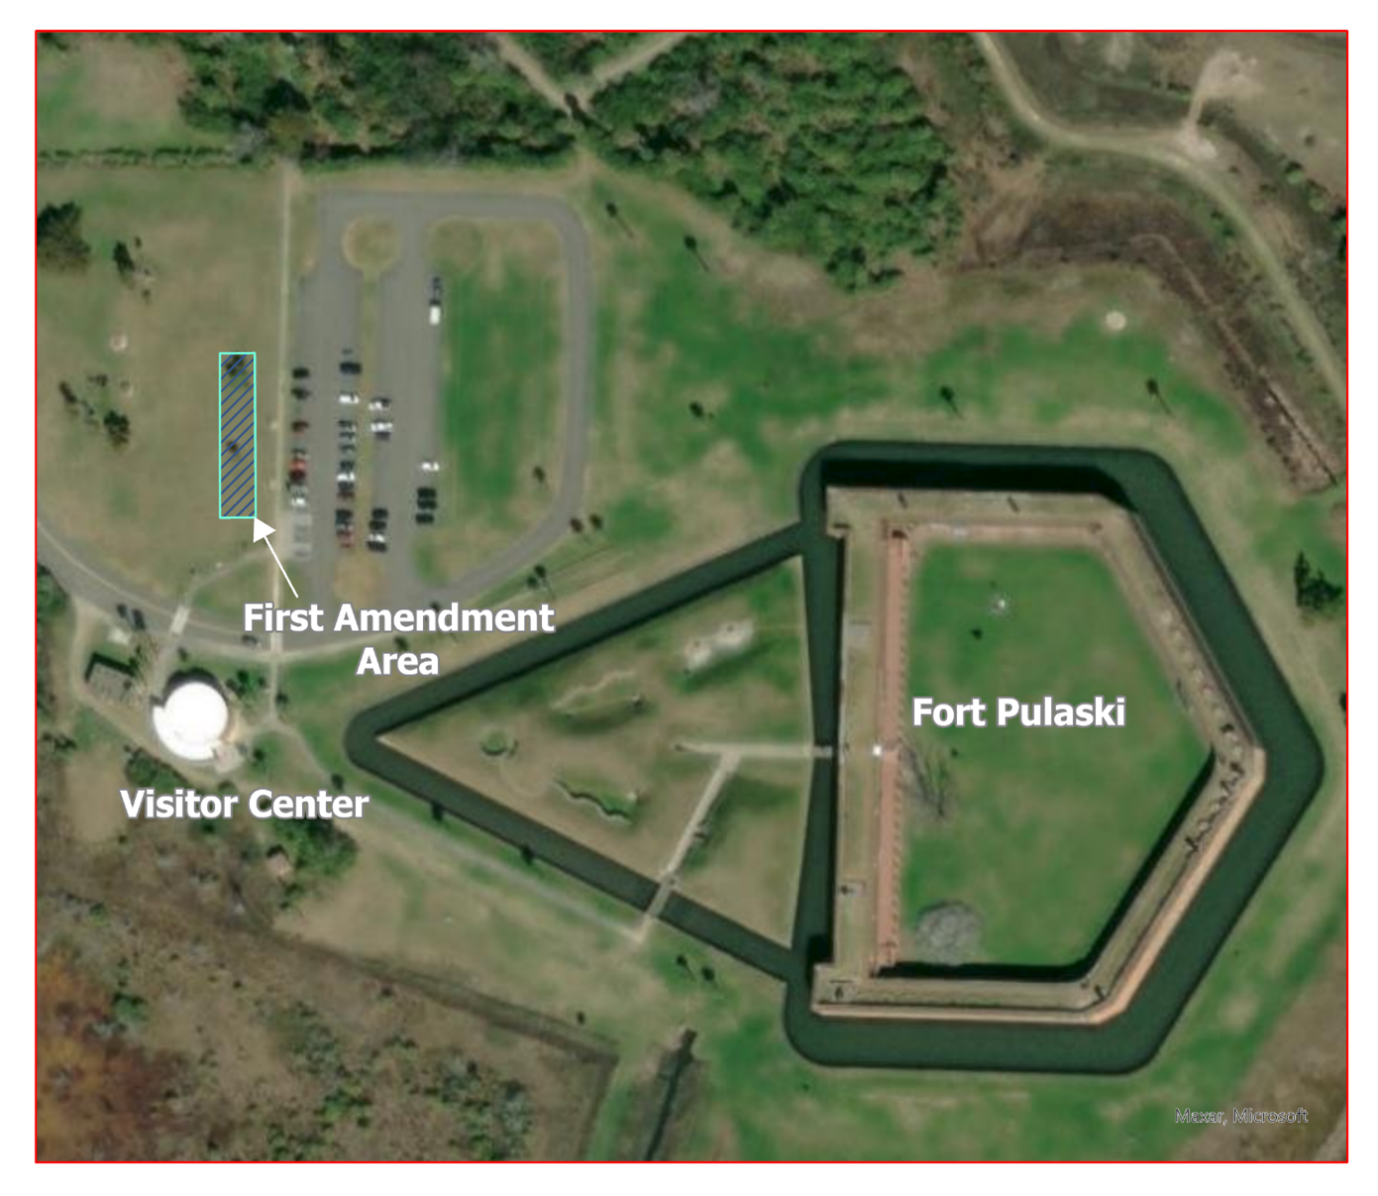 A satellite map that shows the five sided outline of Fort Pulaski, the circlular visitor center, and 2 gray parking lots. to the left of the west parking lot is a small blue box that highlights the first amendment area.